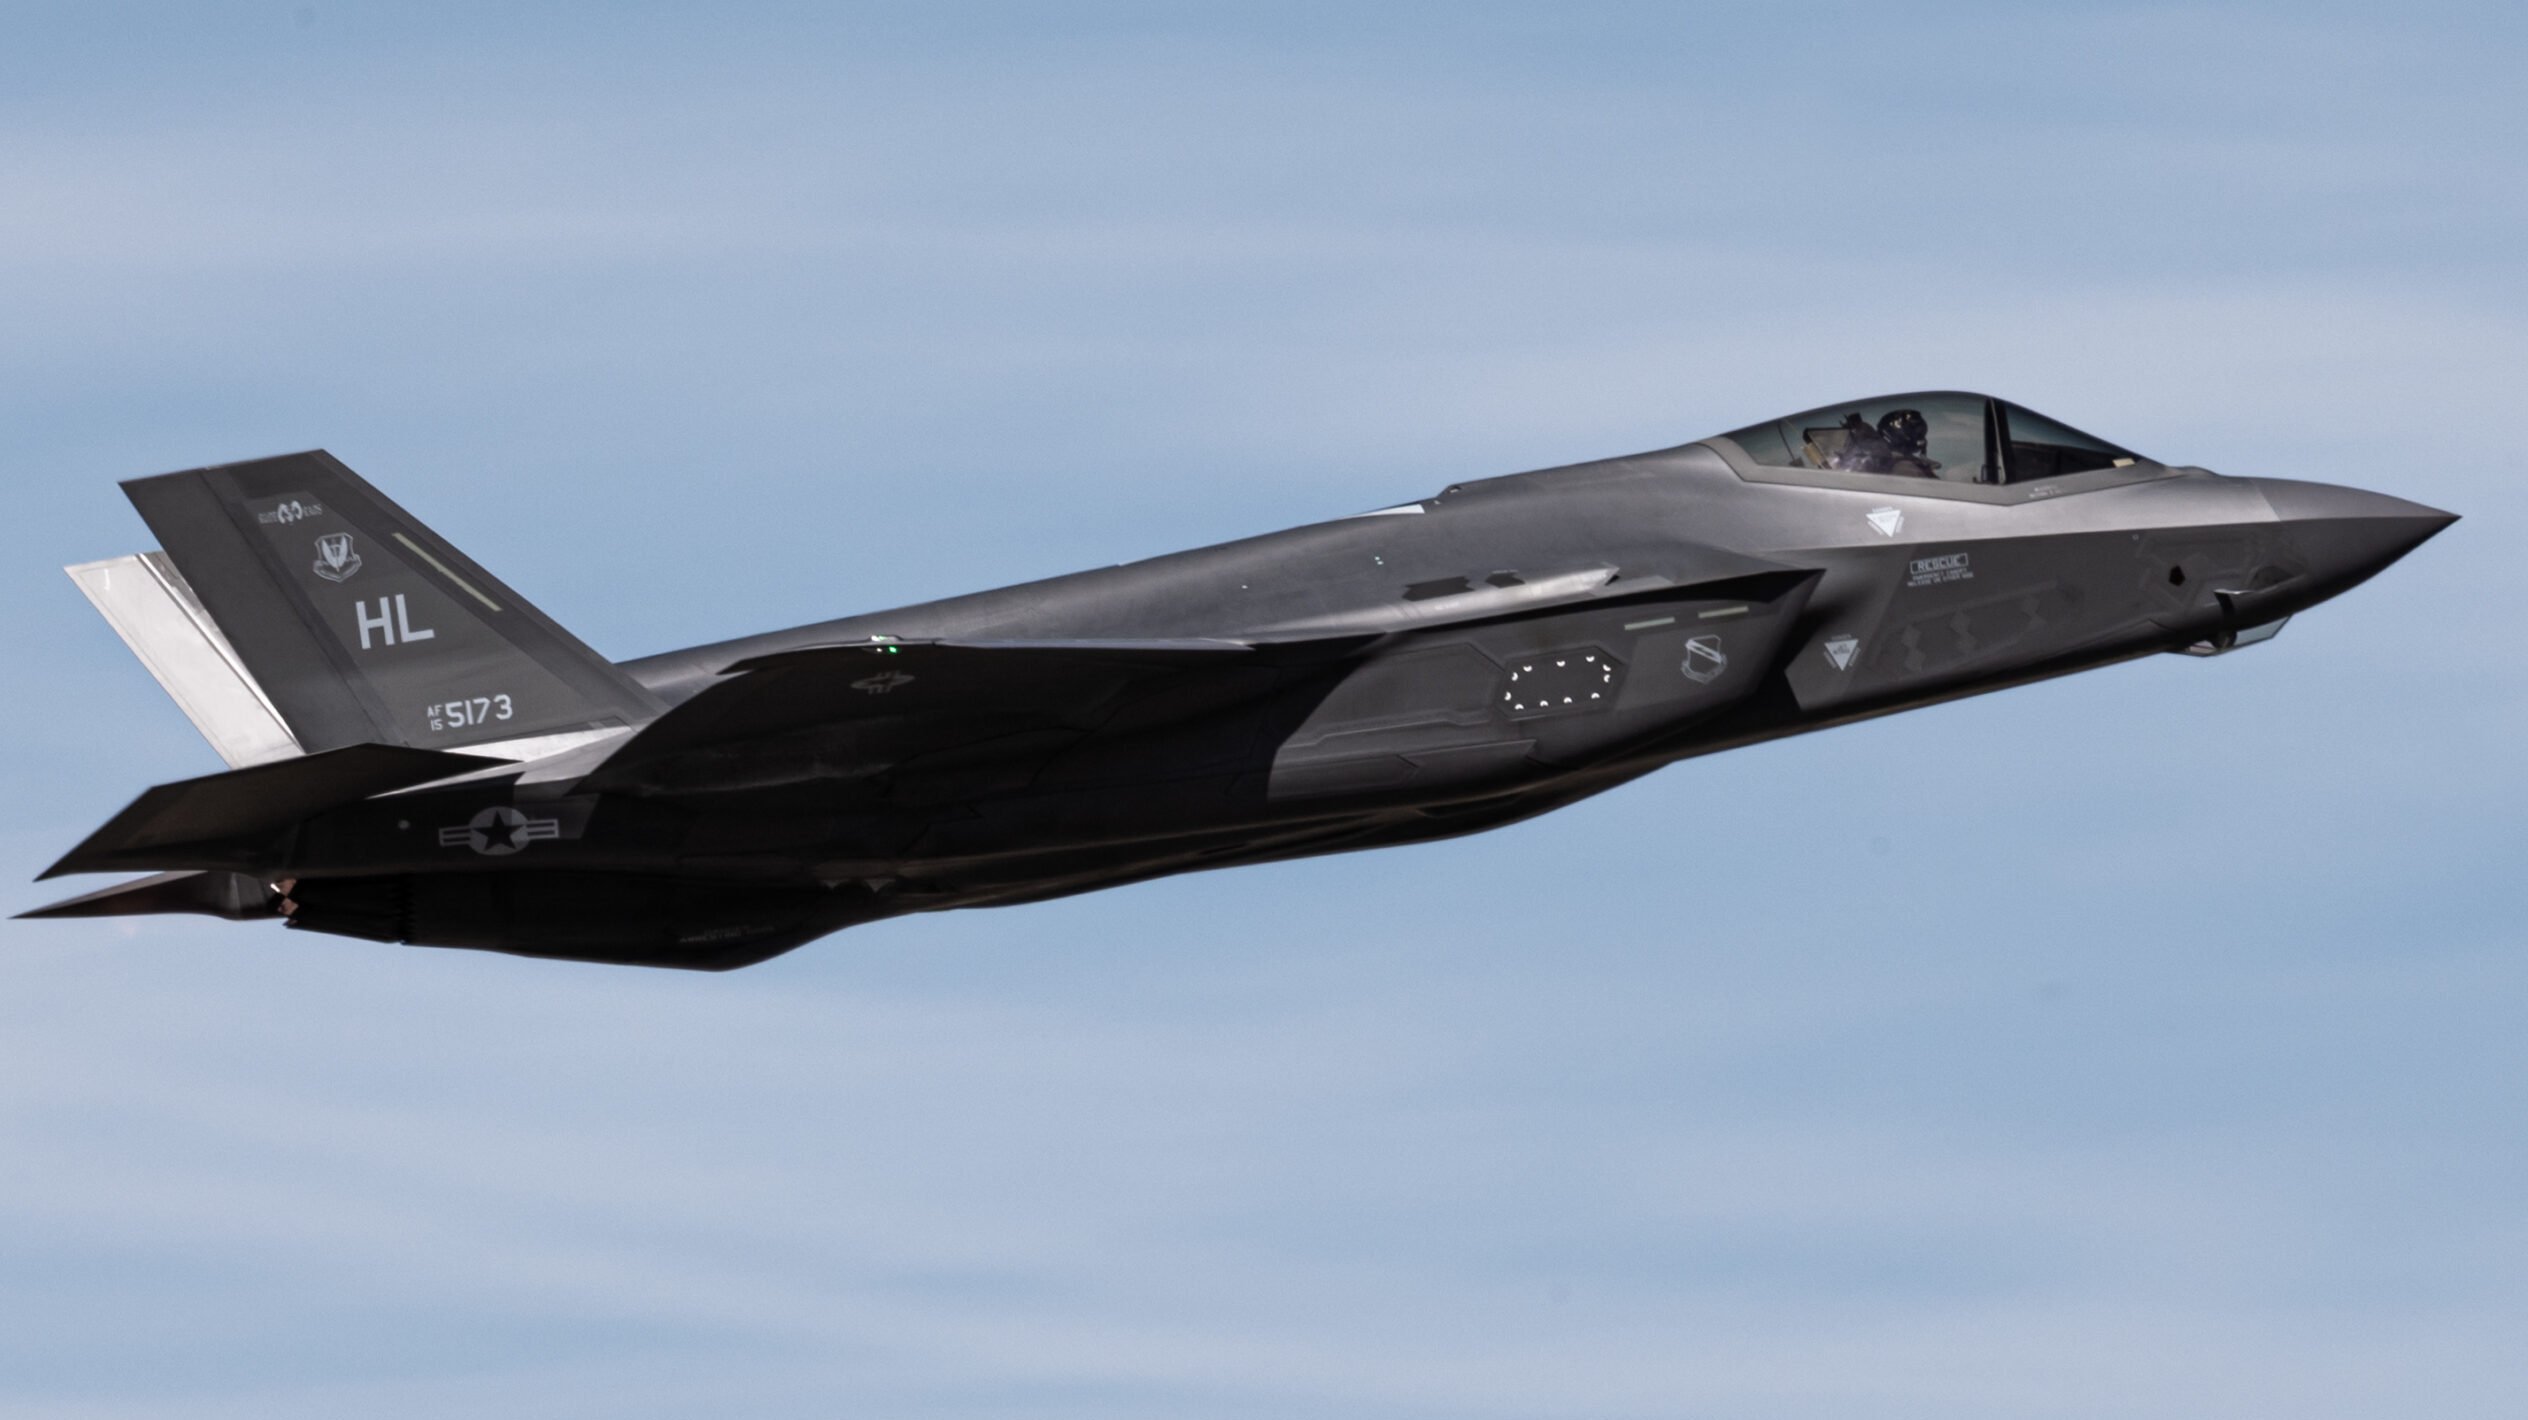 Race for new F-35 cooling system heats up, as DoD won’t rule out competition